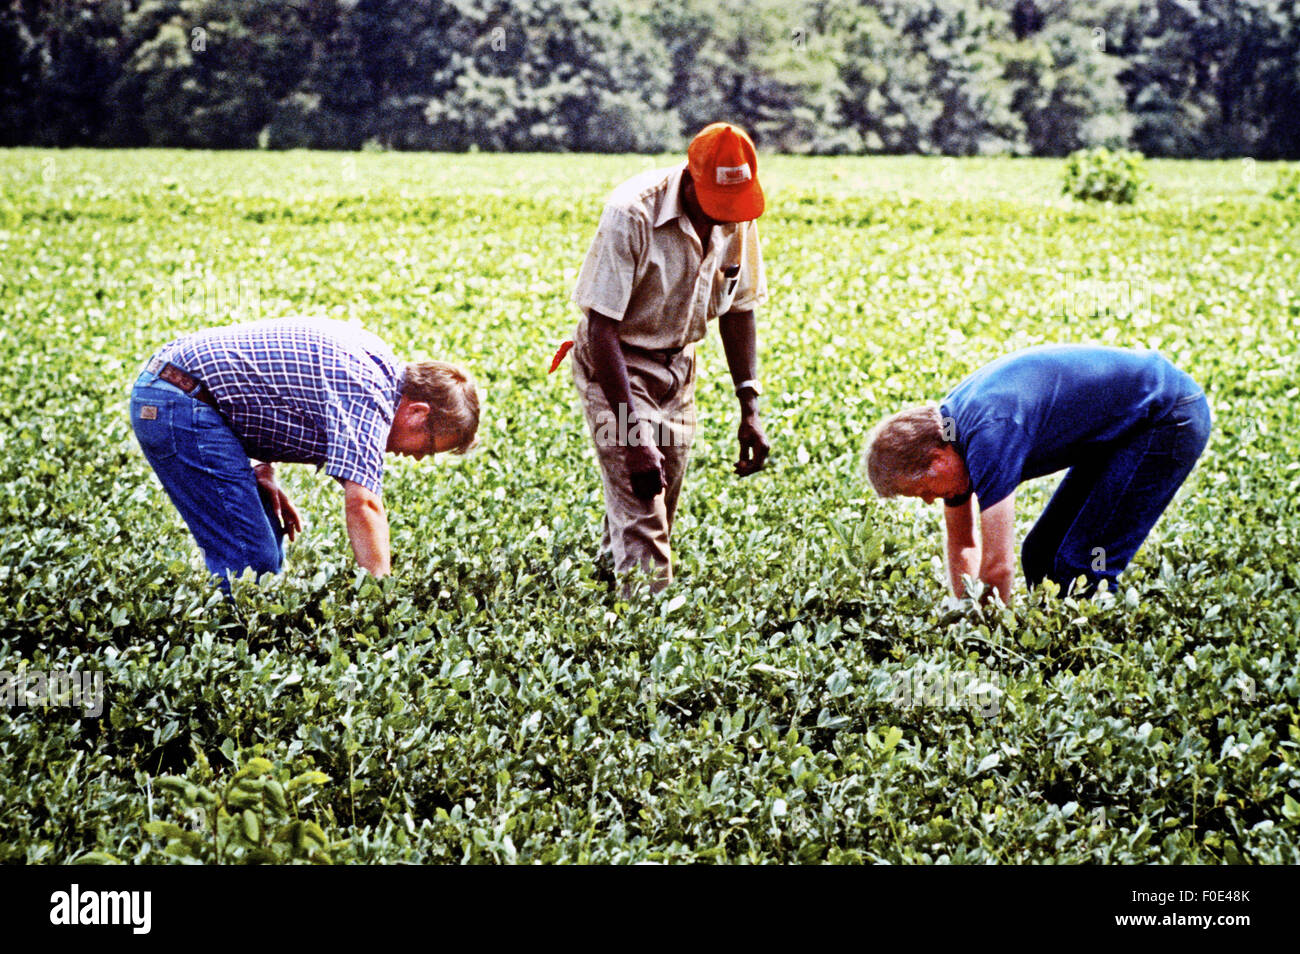 June 1, 1976 - Plains, Georgia, USA - President Jimmy Carter and his brother Billy Carter are joined by a tenant farmer as they assess their summer peanut crop. The Carters own tracts of farmland around Plains, Georgia along with a peanut warehouse in that city, although the President's holdings are held in a blind trust during his presidency. (Credit Image: © Ken Hawkins via ZUMA Wire) Stock Photo